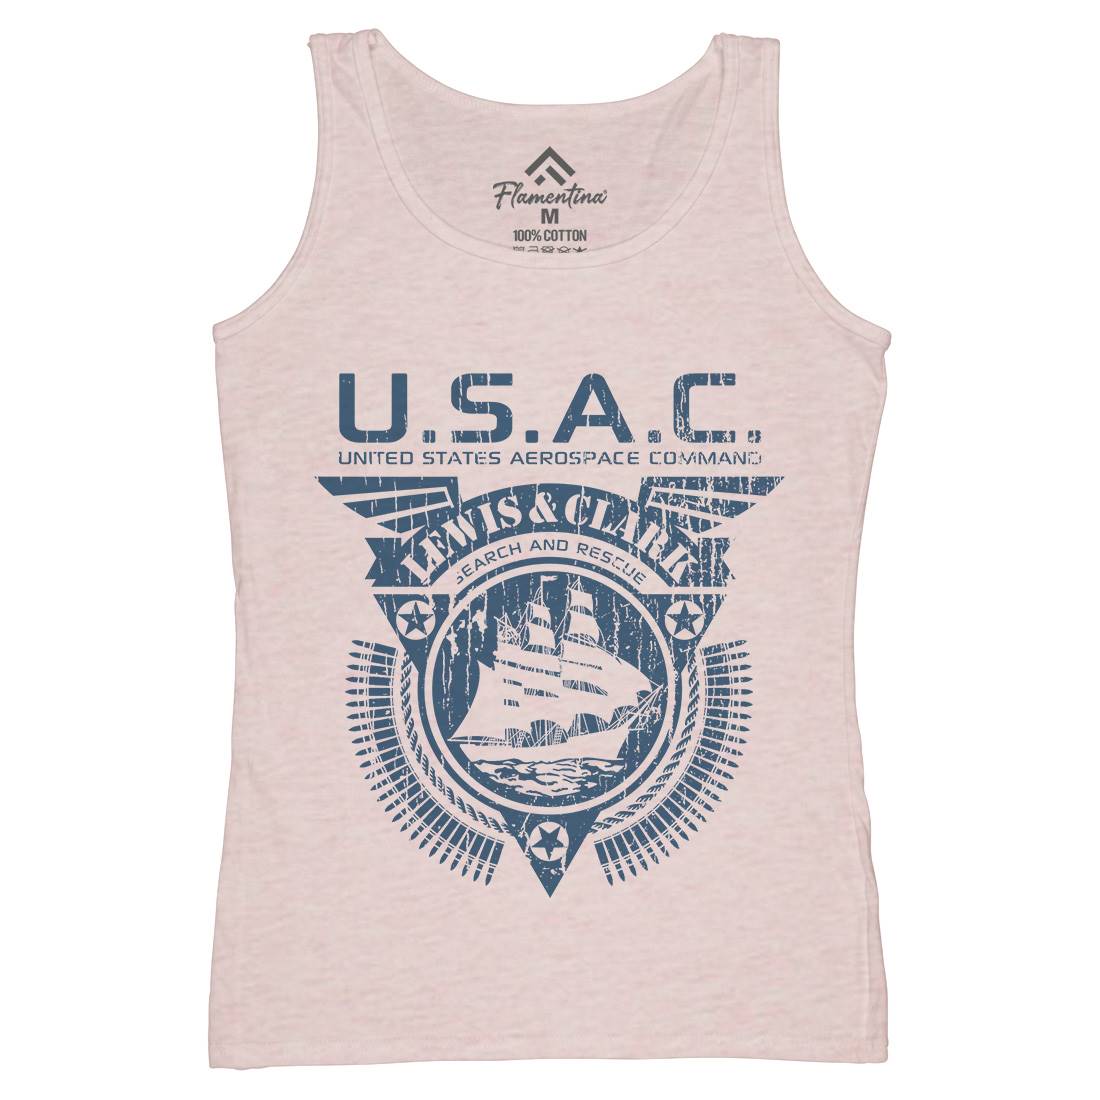 Usac Lewis And Clark Womens Organic Tank Top Vest Space D297